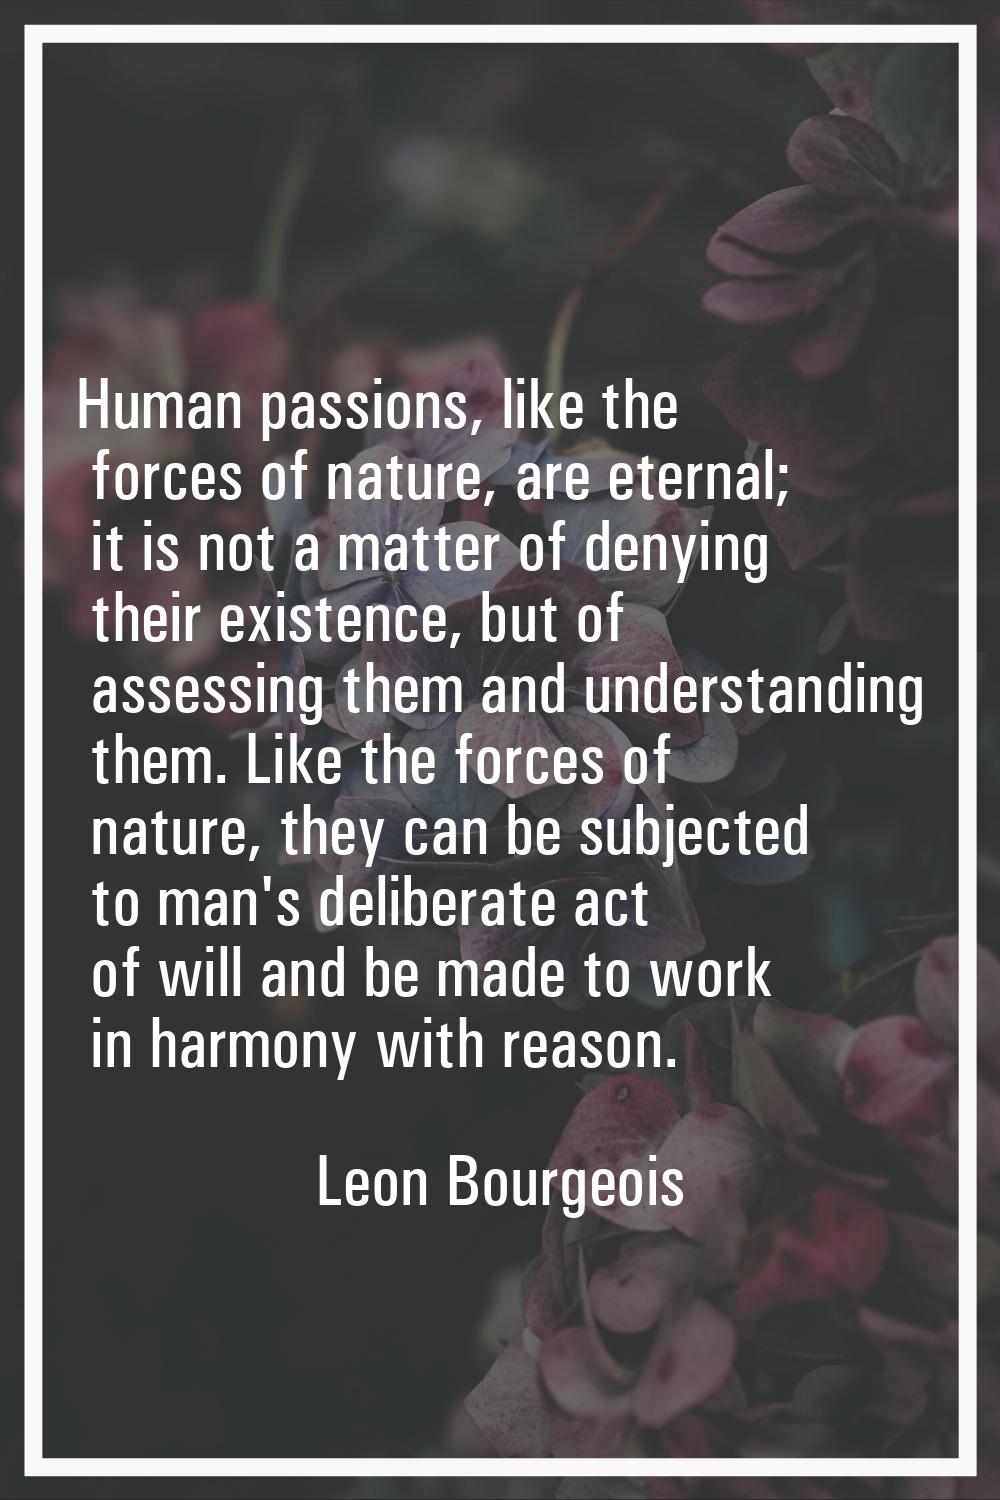 Human passions, like the forces of nature, are eternal; it is not a matter of denying their existen